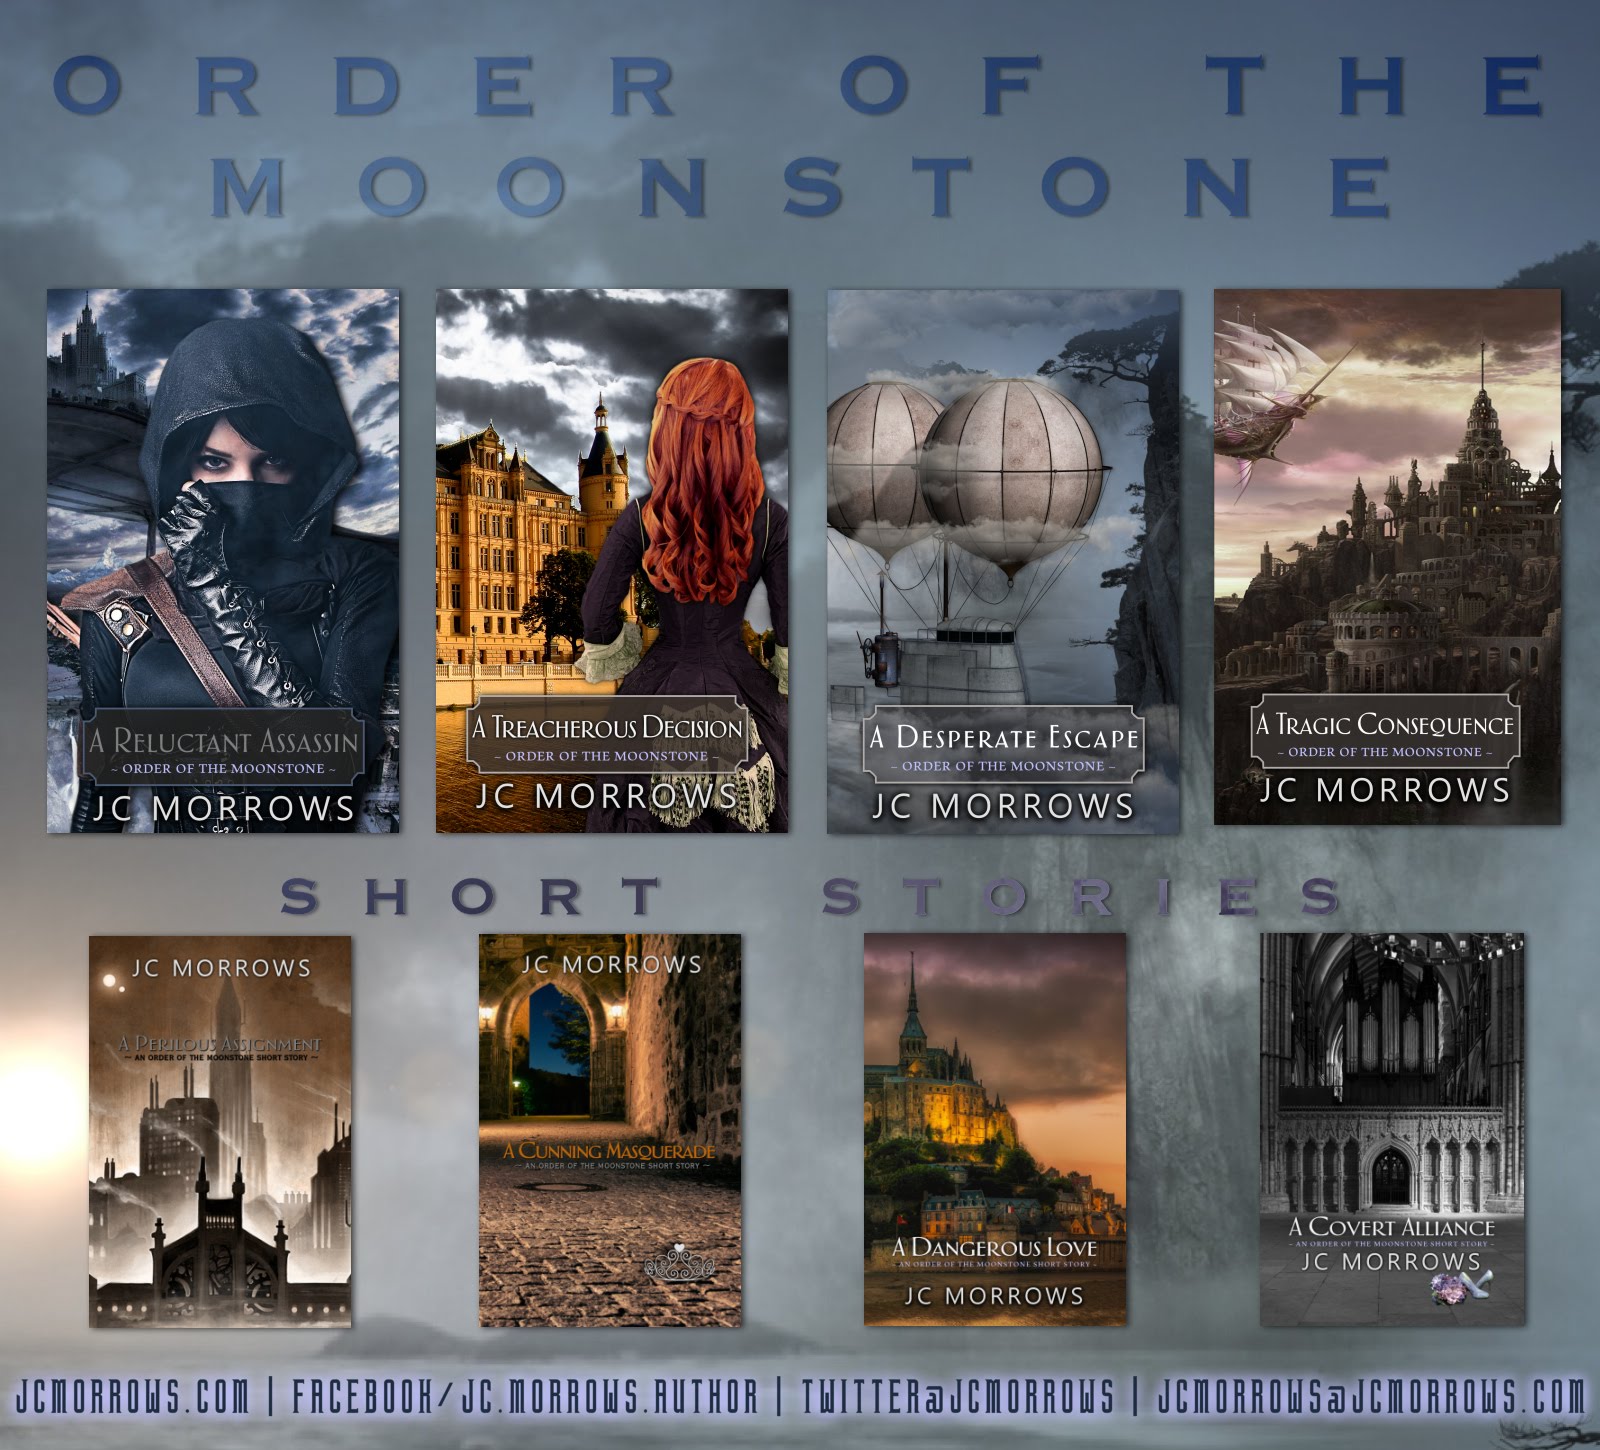 Order of the Moonstone series